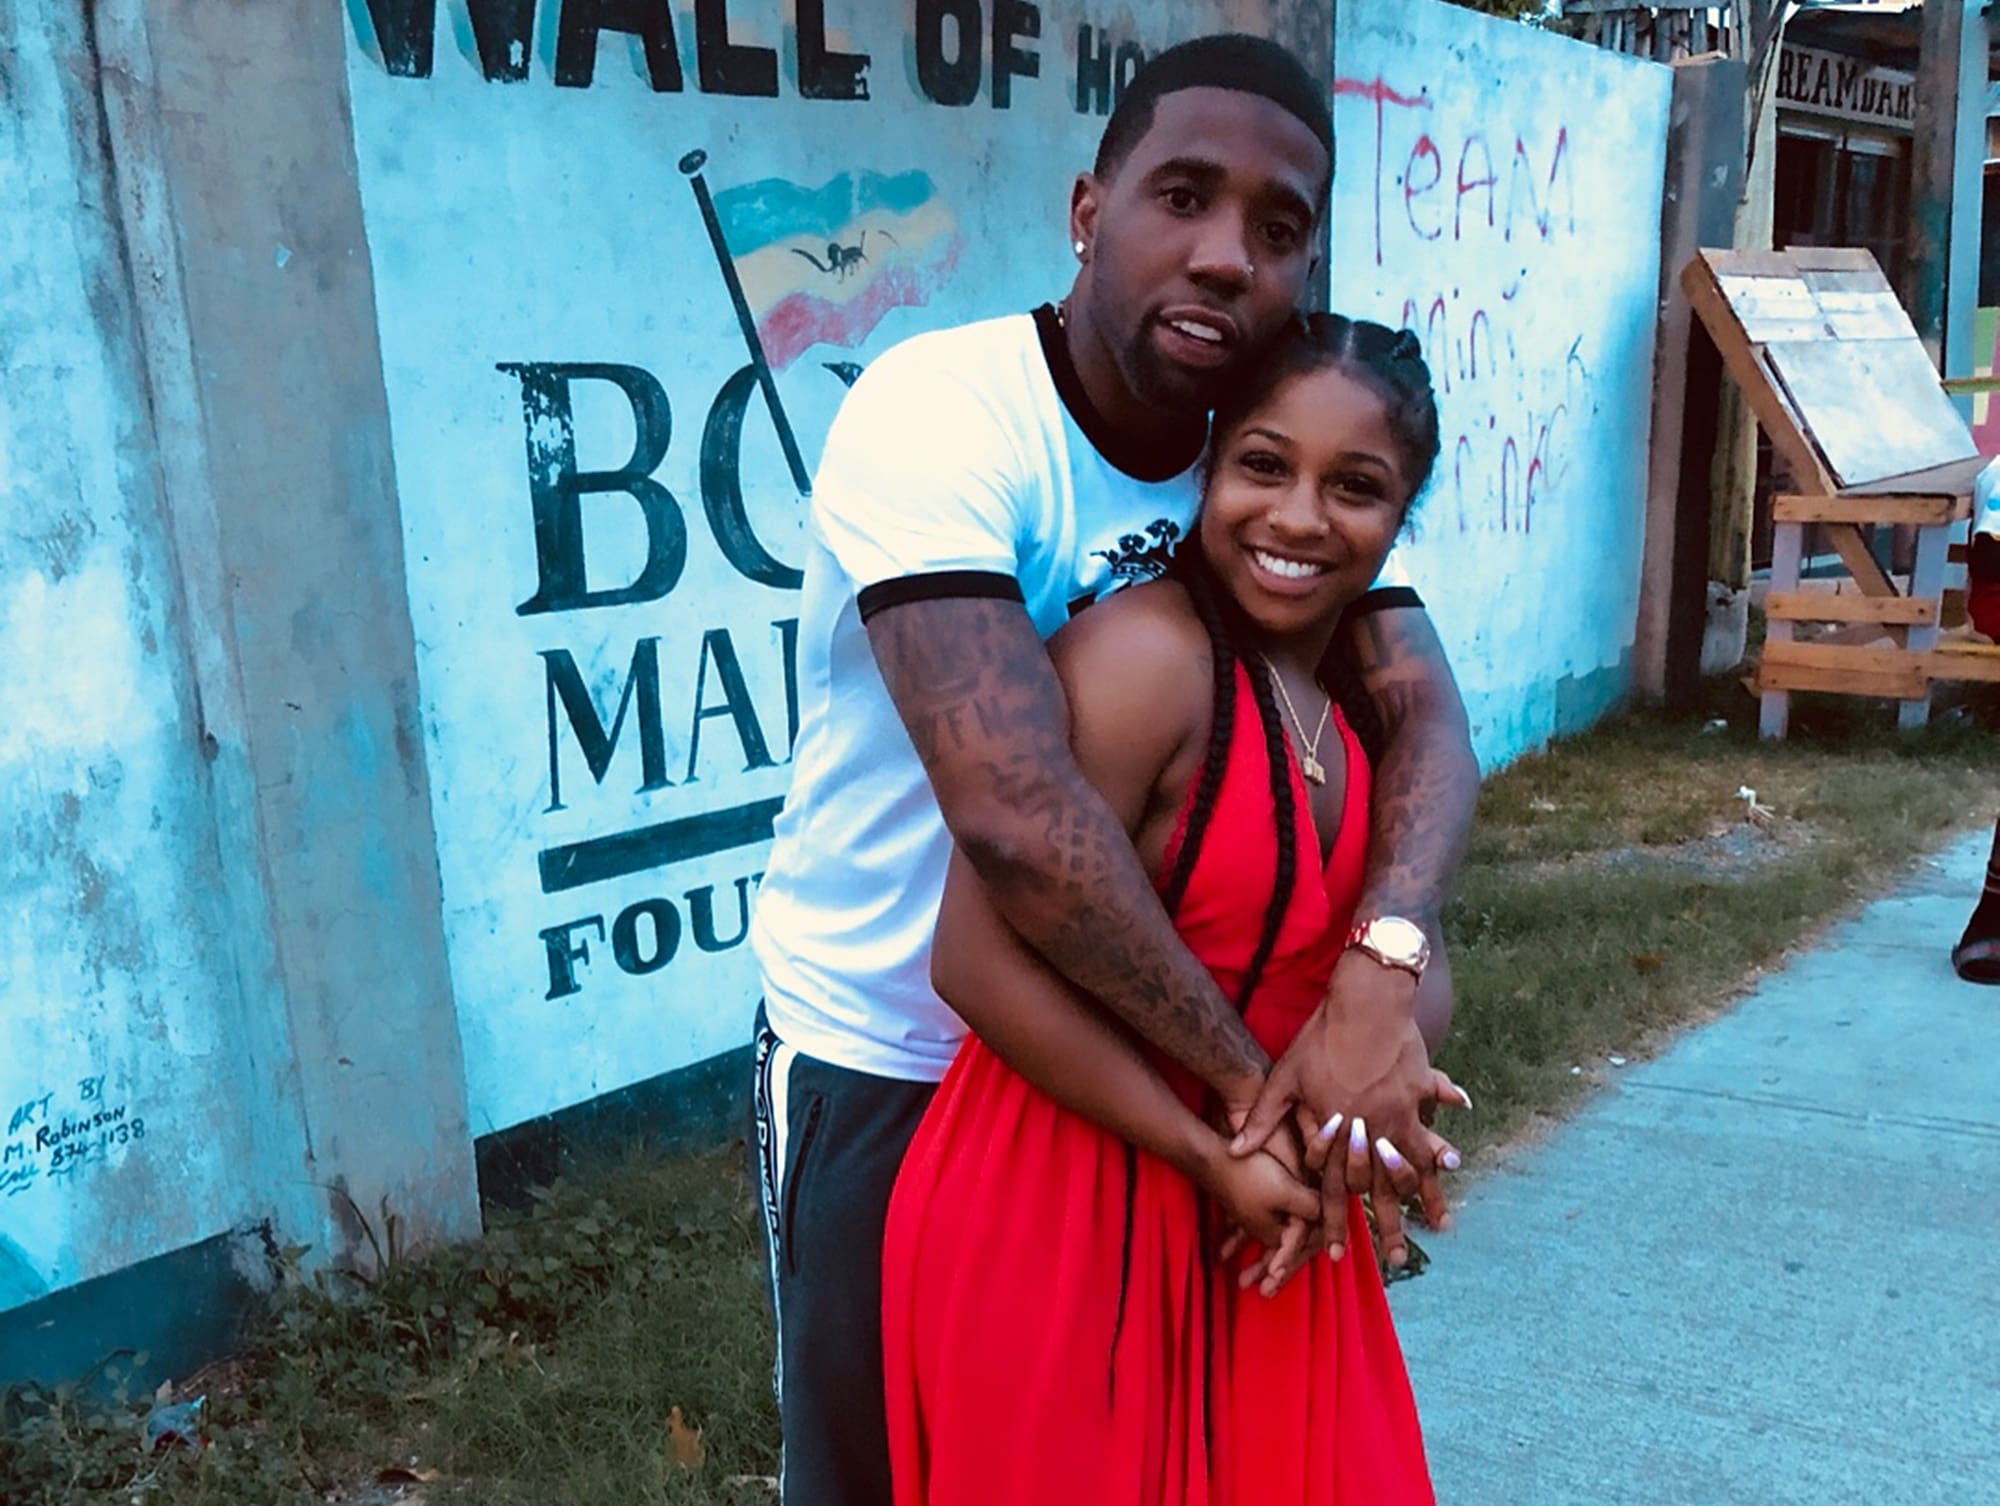 Reginae Carter's Fans Are Confused After Seeing That She's Back Together With YFN Lucci